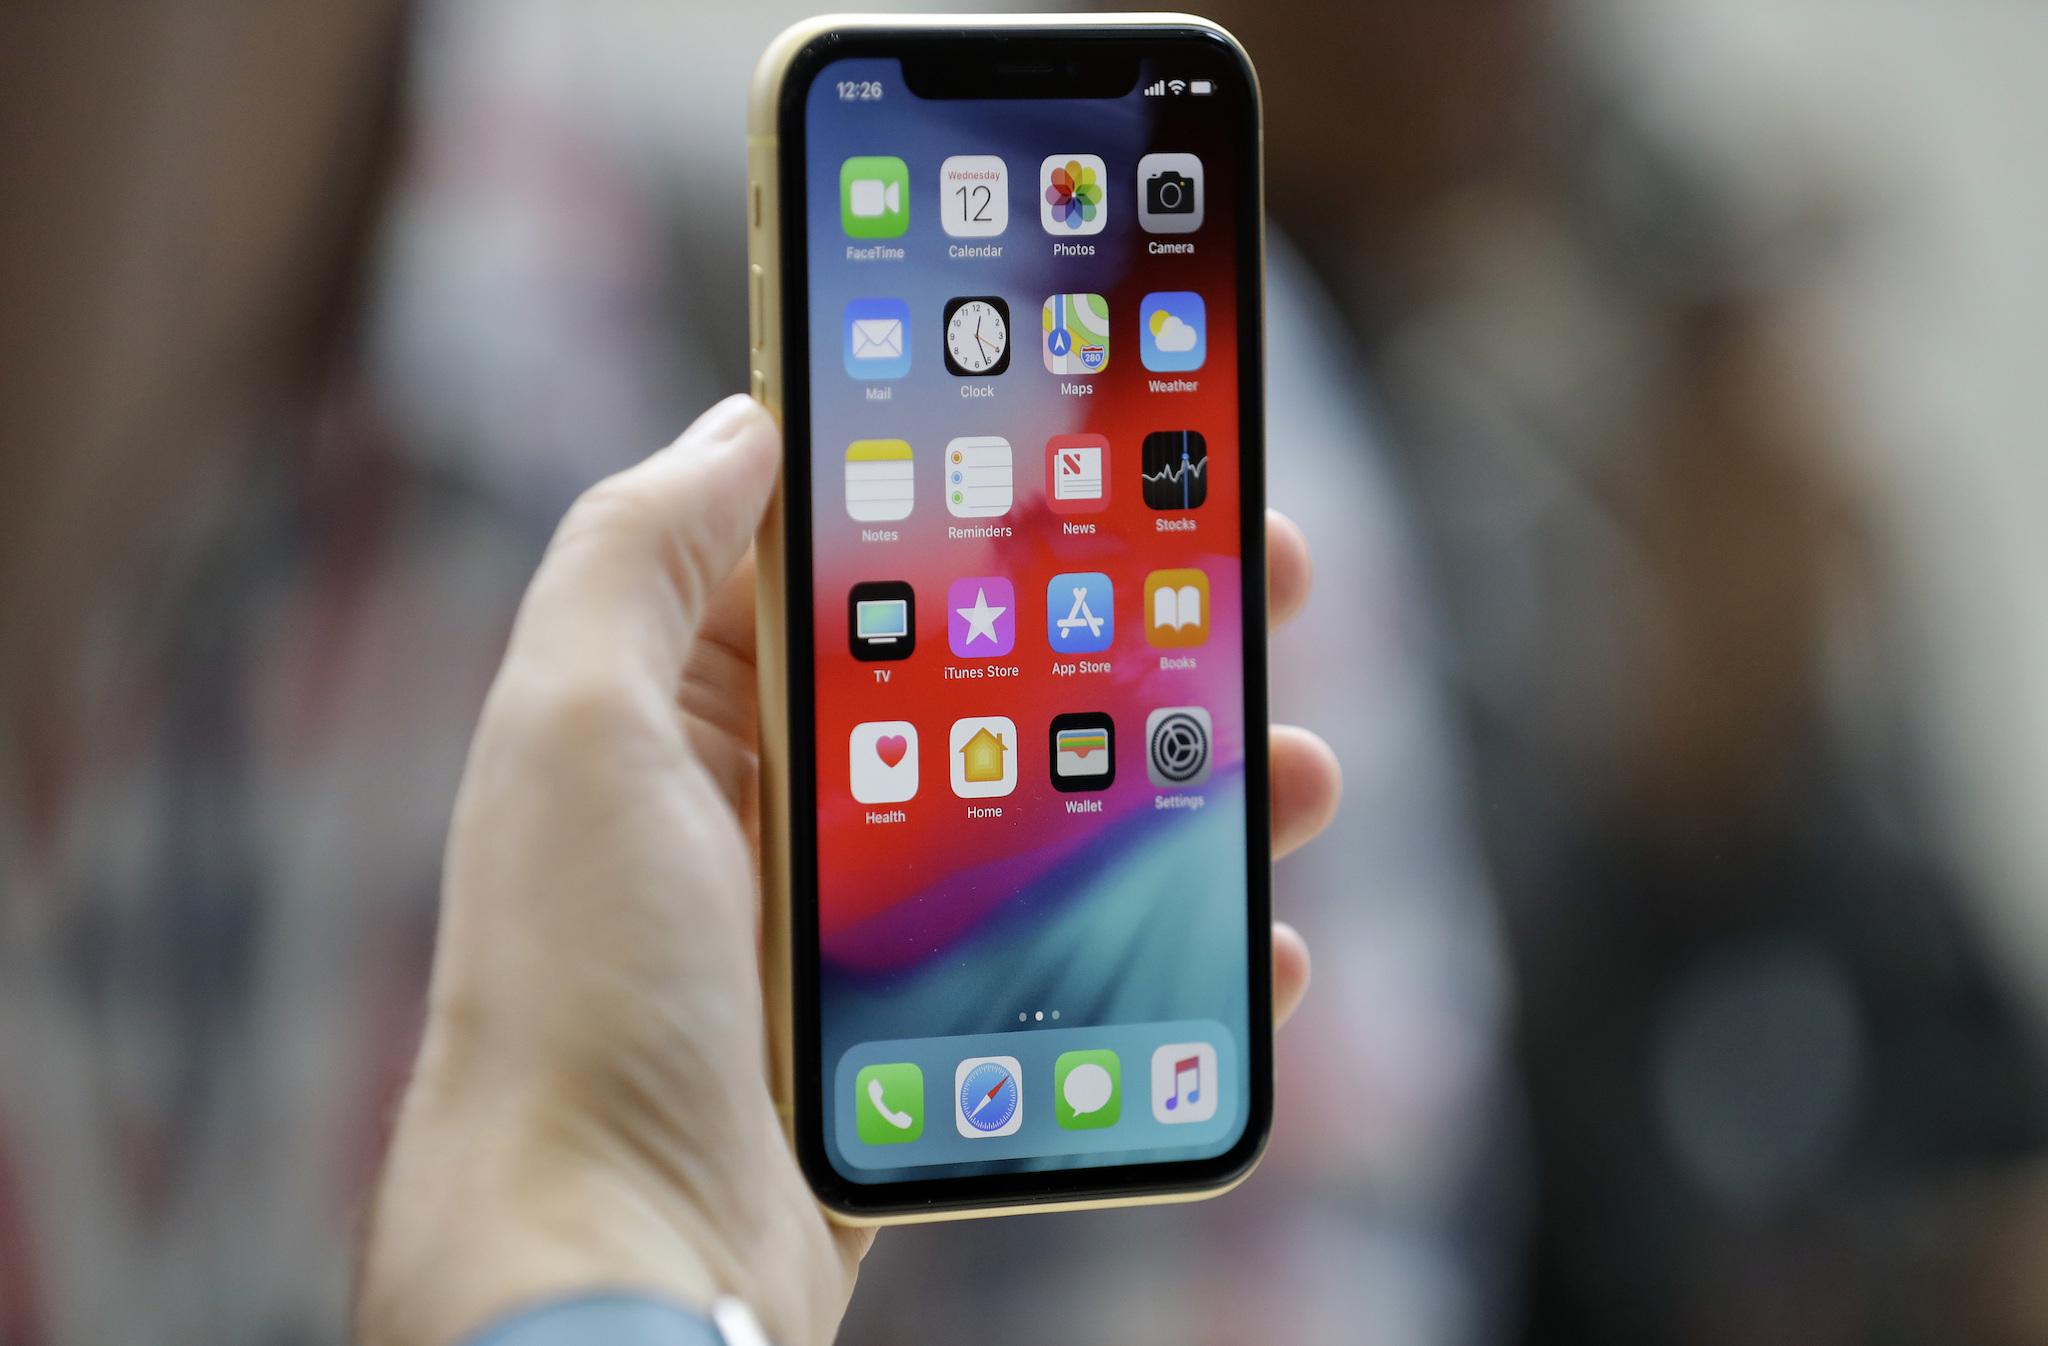 iOS 13: Apple releases new beta version of iPhone software as public release date nears